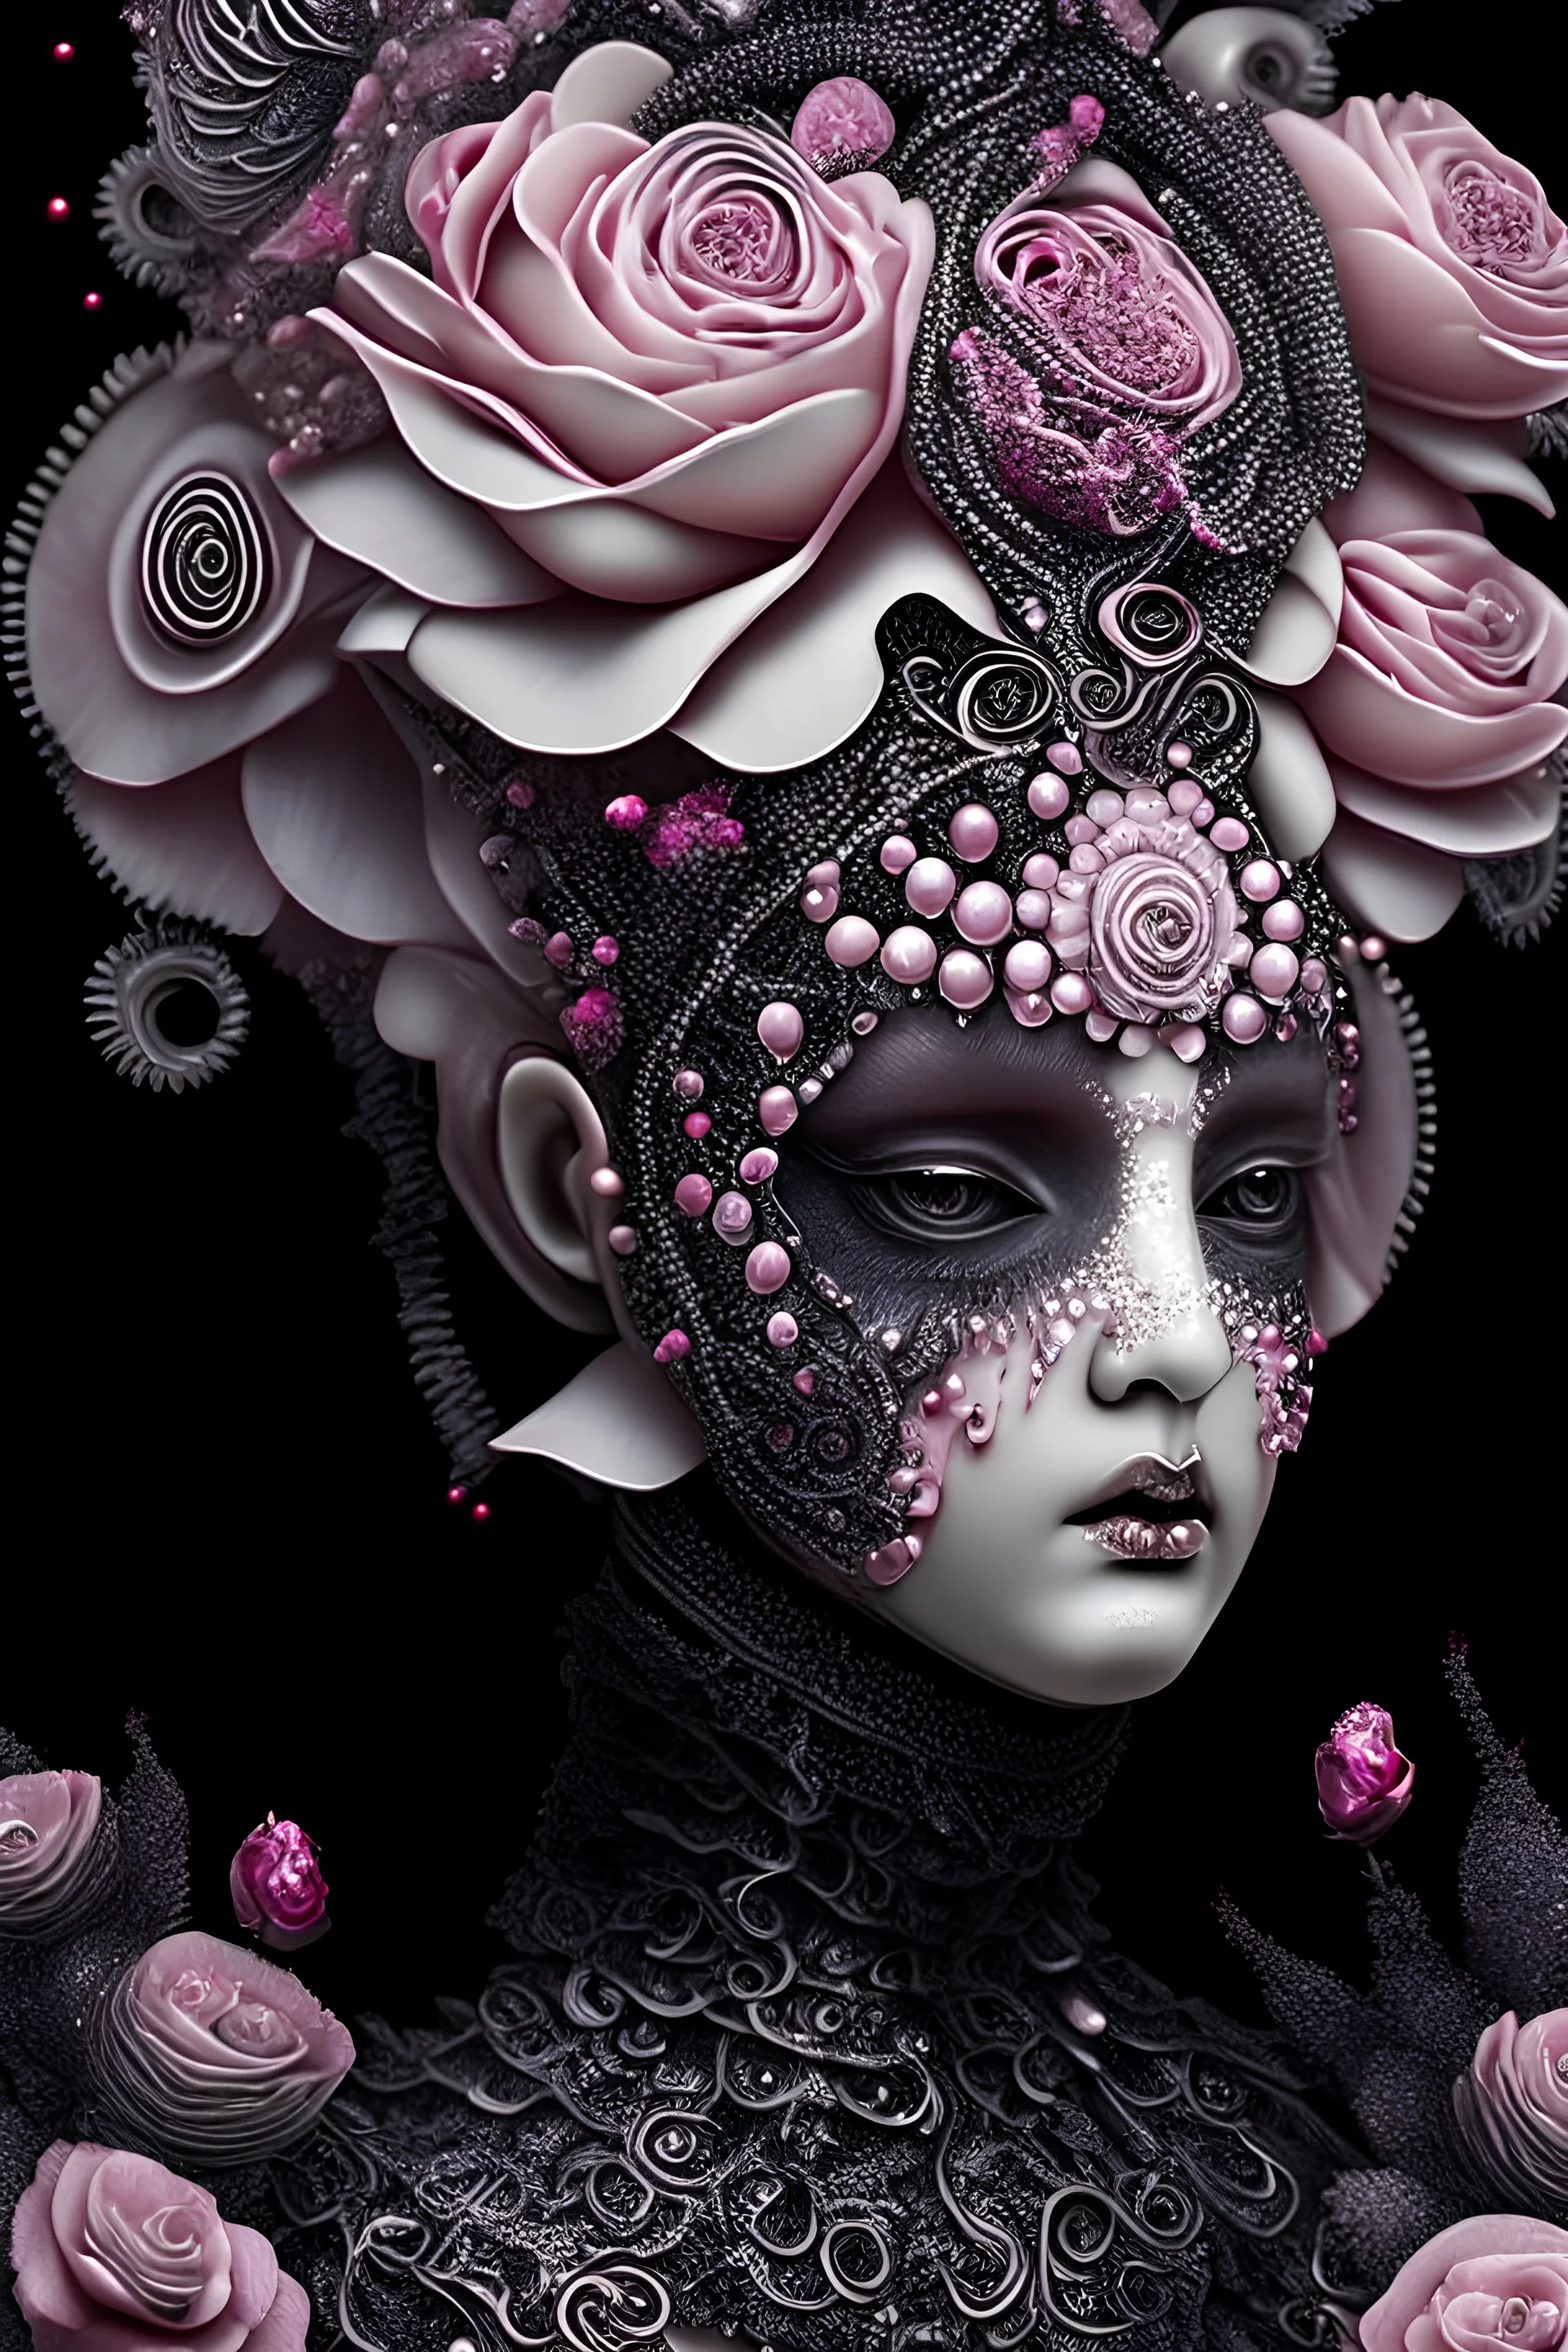 Beautiful bioluminescense black and silver humanoid lady snail textured detailed lace ornate house portrait, adorned with white and pink flower dust, pink rose and black rose silver dust beads, wearing diadem headress, wearing Renaissance costume, organic bio spinal ribbed detail of Renaissance textured bioluminescense watery floral silver floral dust creative background maximálist hyperrealistic concept art